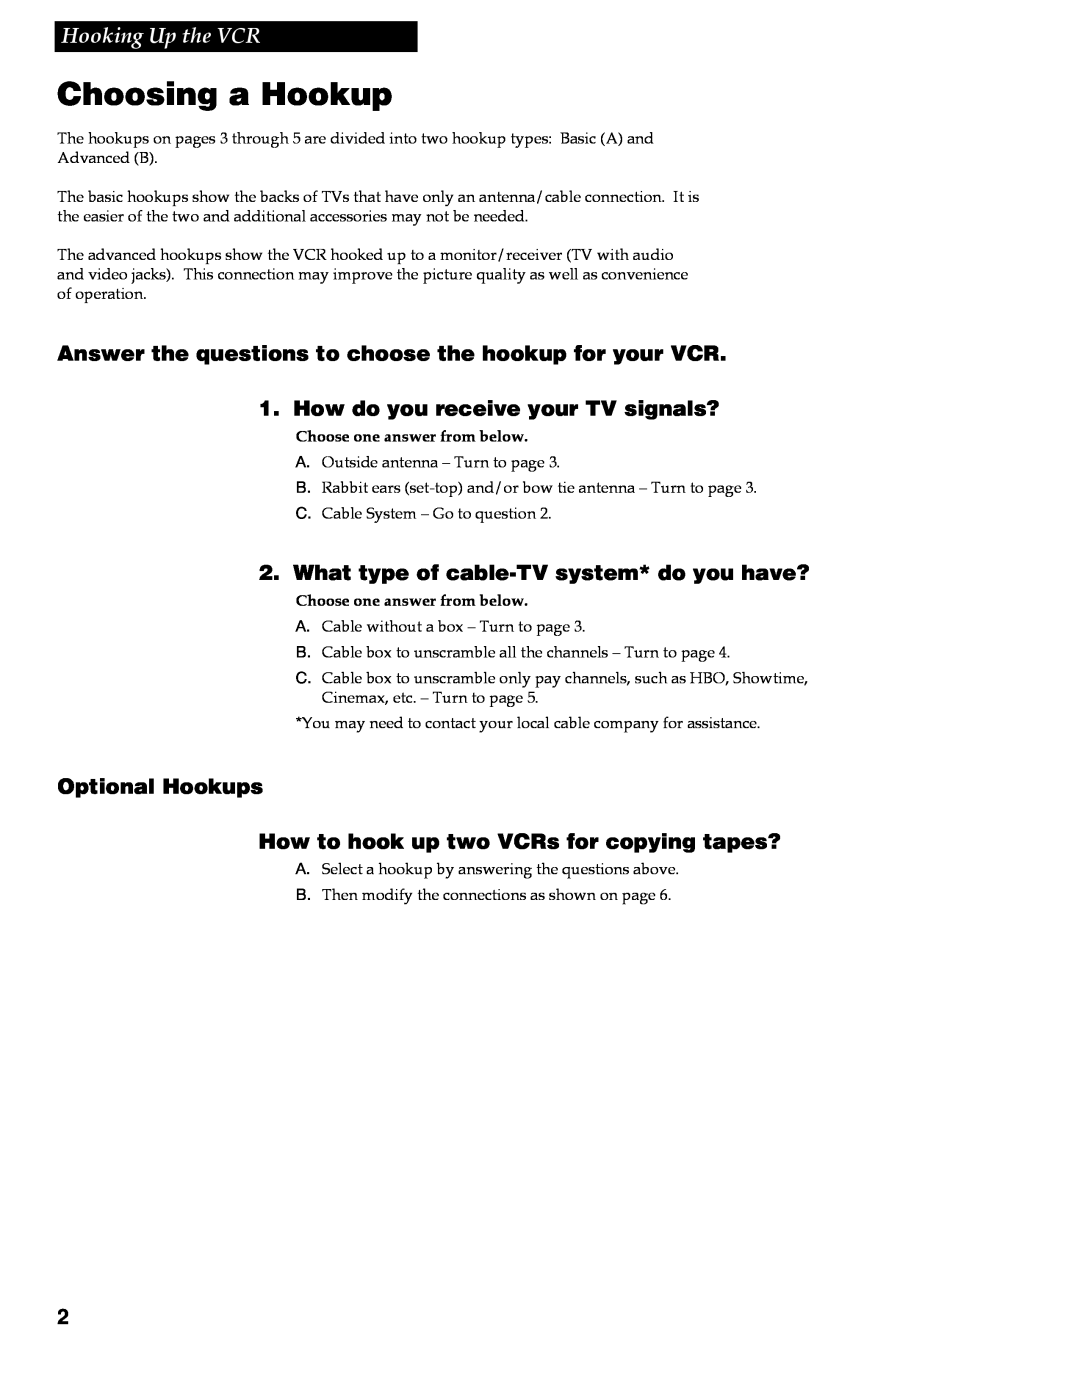 RCA VR609HF manual Choosing a Hookup, Hooking Up the VCR, Answer the questions to choose the hookup for your VCR 